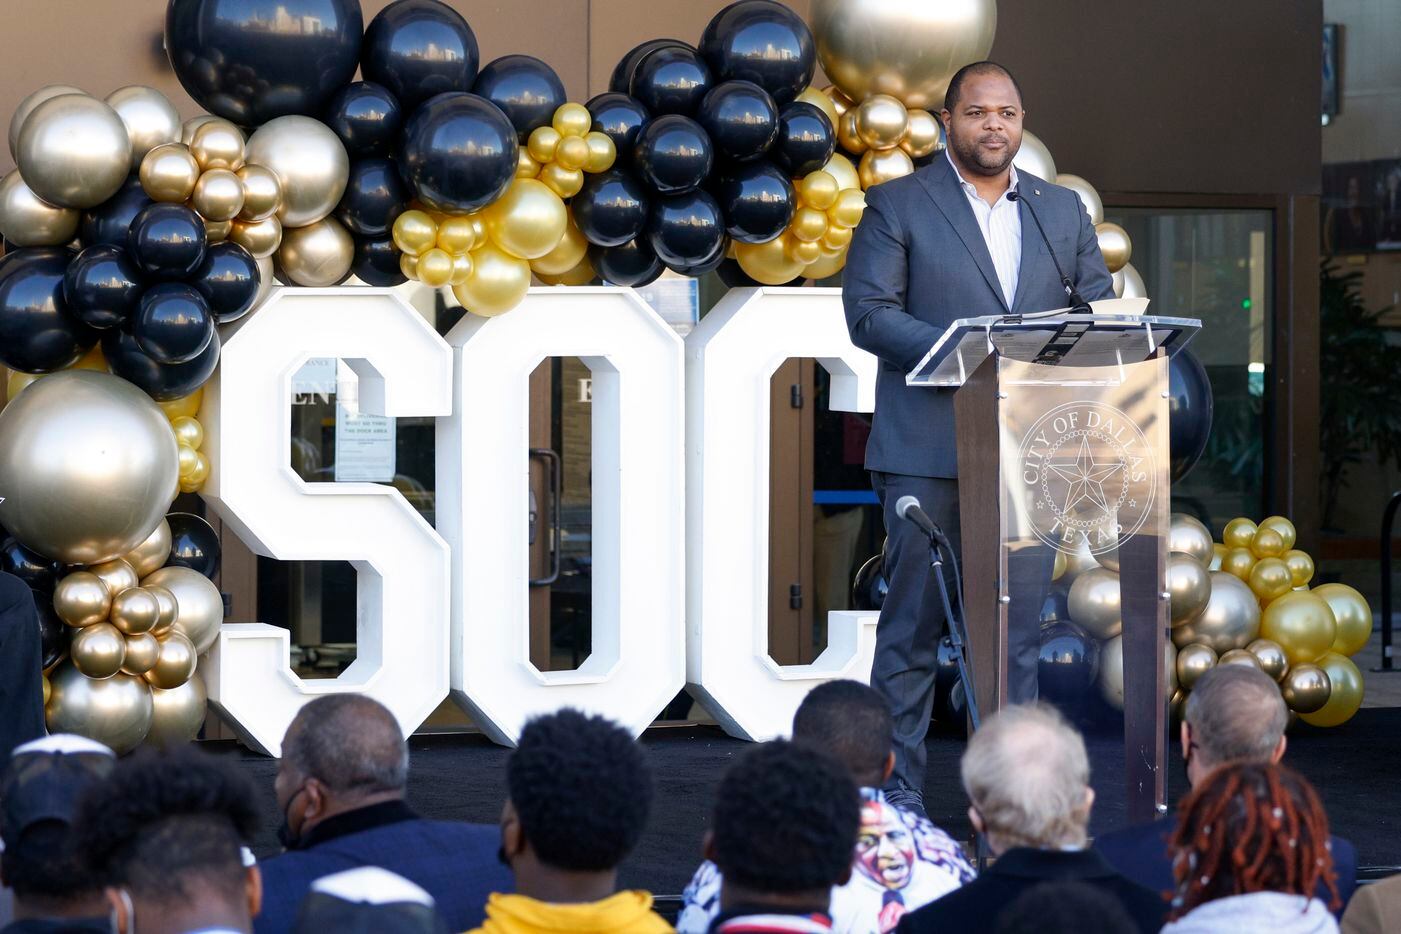 Dallas Mayor Eric Johnson speaks during a ceremony recognizing South Oak Cliff’s UIL Class 5A Division II football state championship at Dallas City Hall in Dallas, on Wednesday, Jan. 12, 2022.